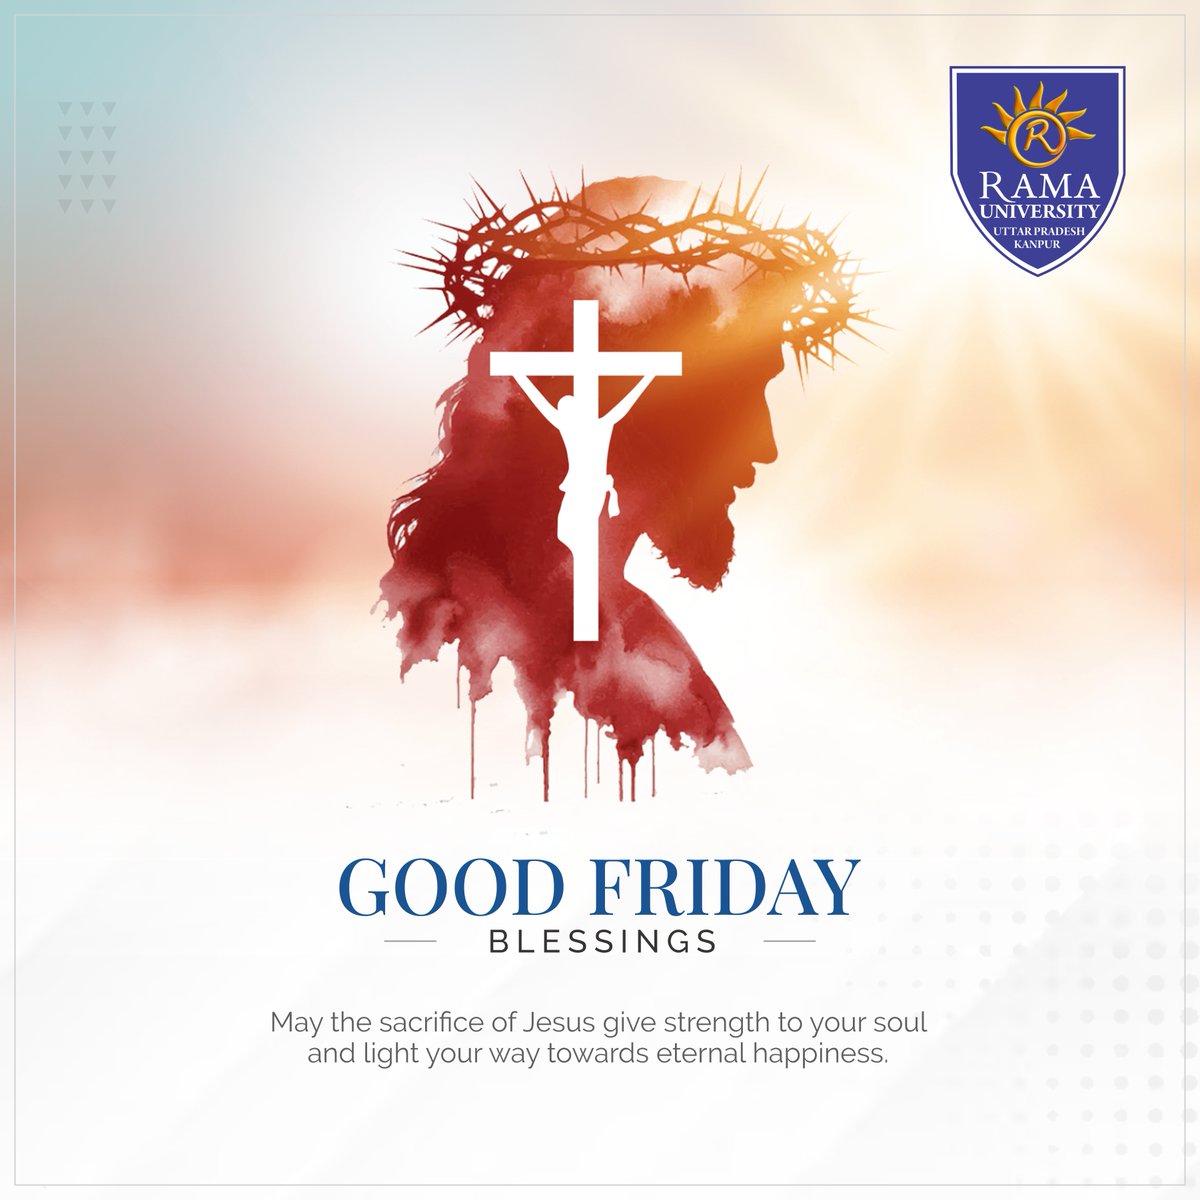 🌟 Reflecting on the solemn significance of this day... 🙏 Let's pause to remember the sacrifice and love that epitomizes #GoodFriday. #Faith #Reflection #EasterWeekend #Sacrifice #Love #HolyWeek #Prayer #Christianity #Redemption #Grace #Blessings #Peace #Mercy #Divine #Cross